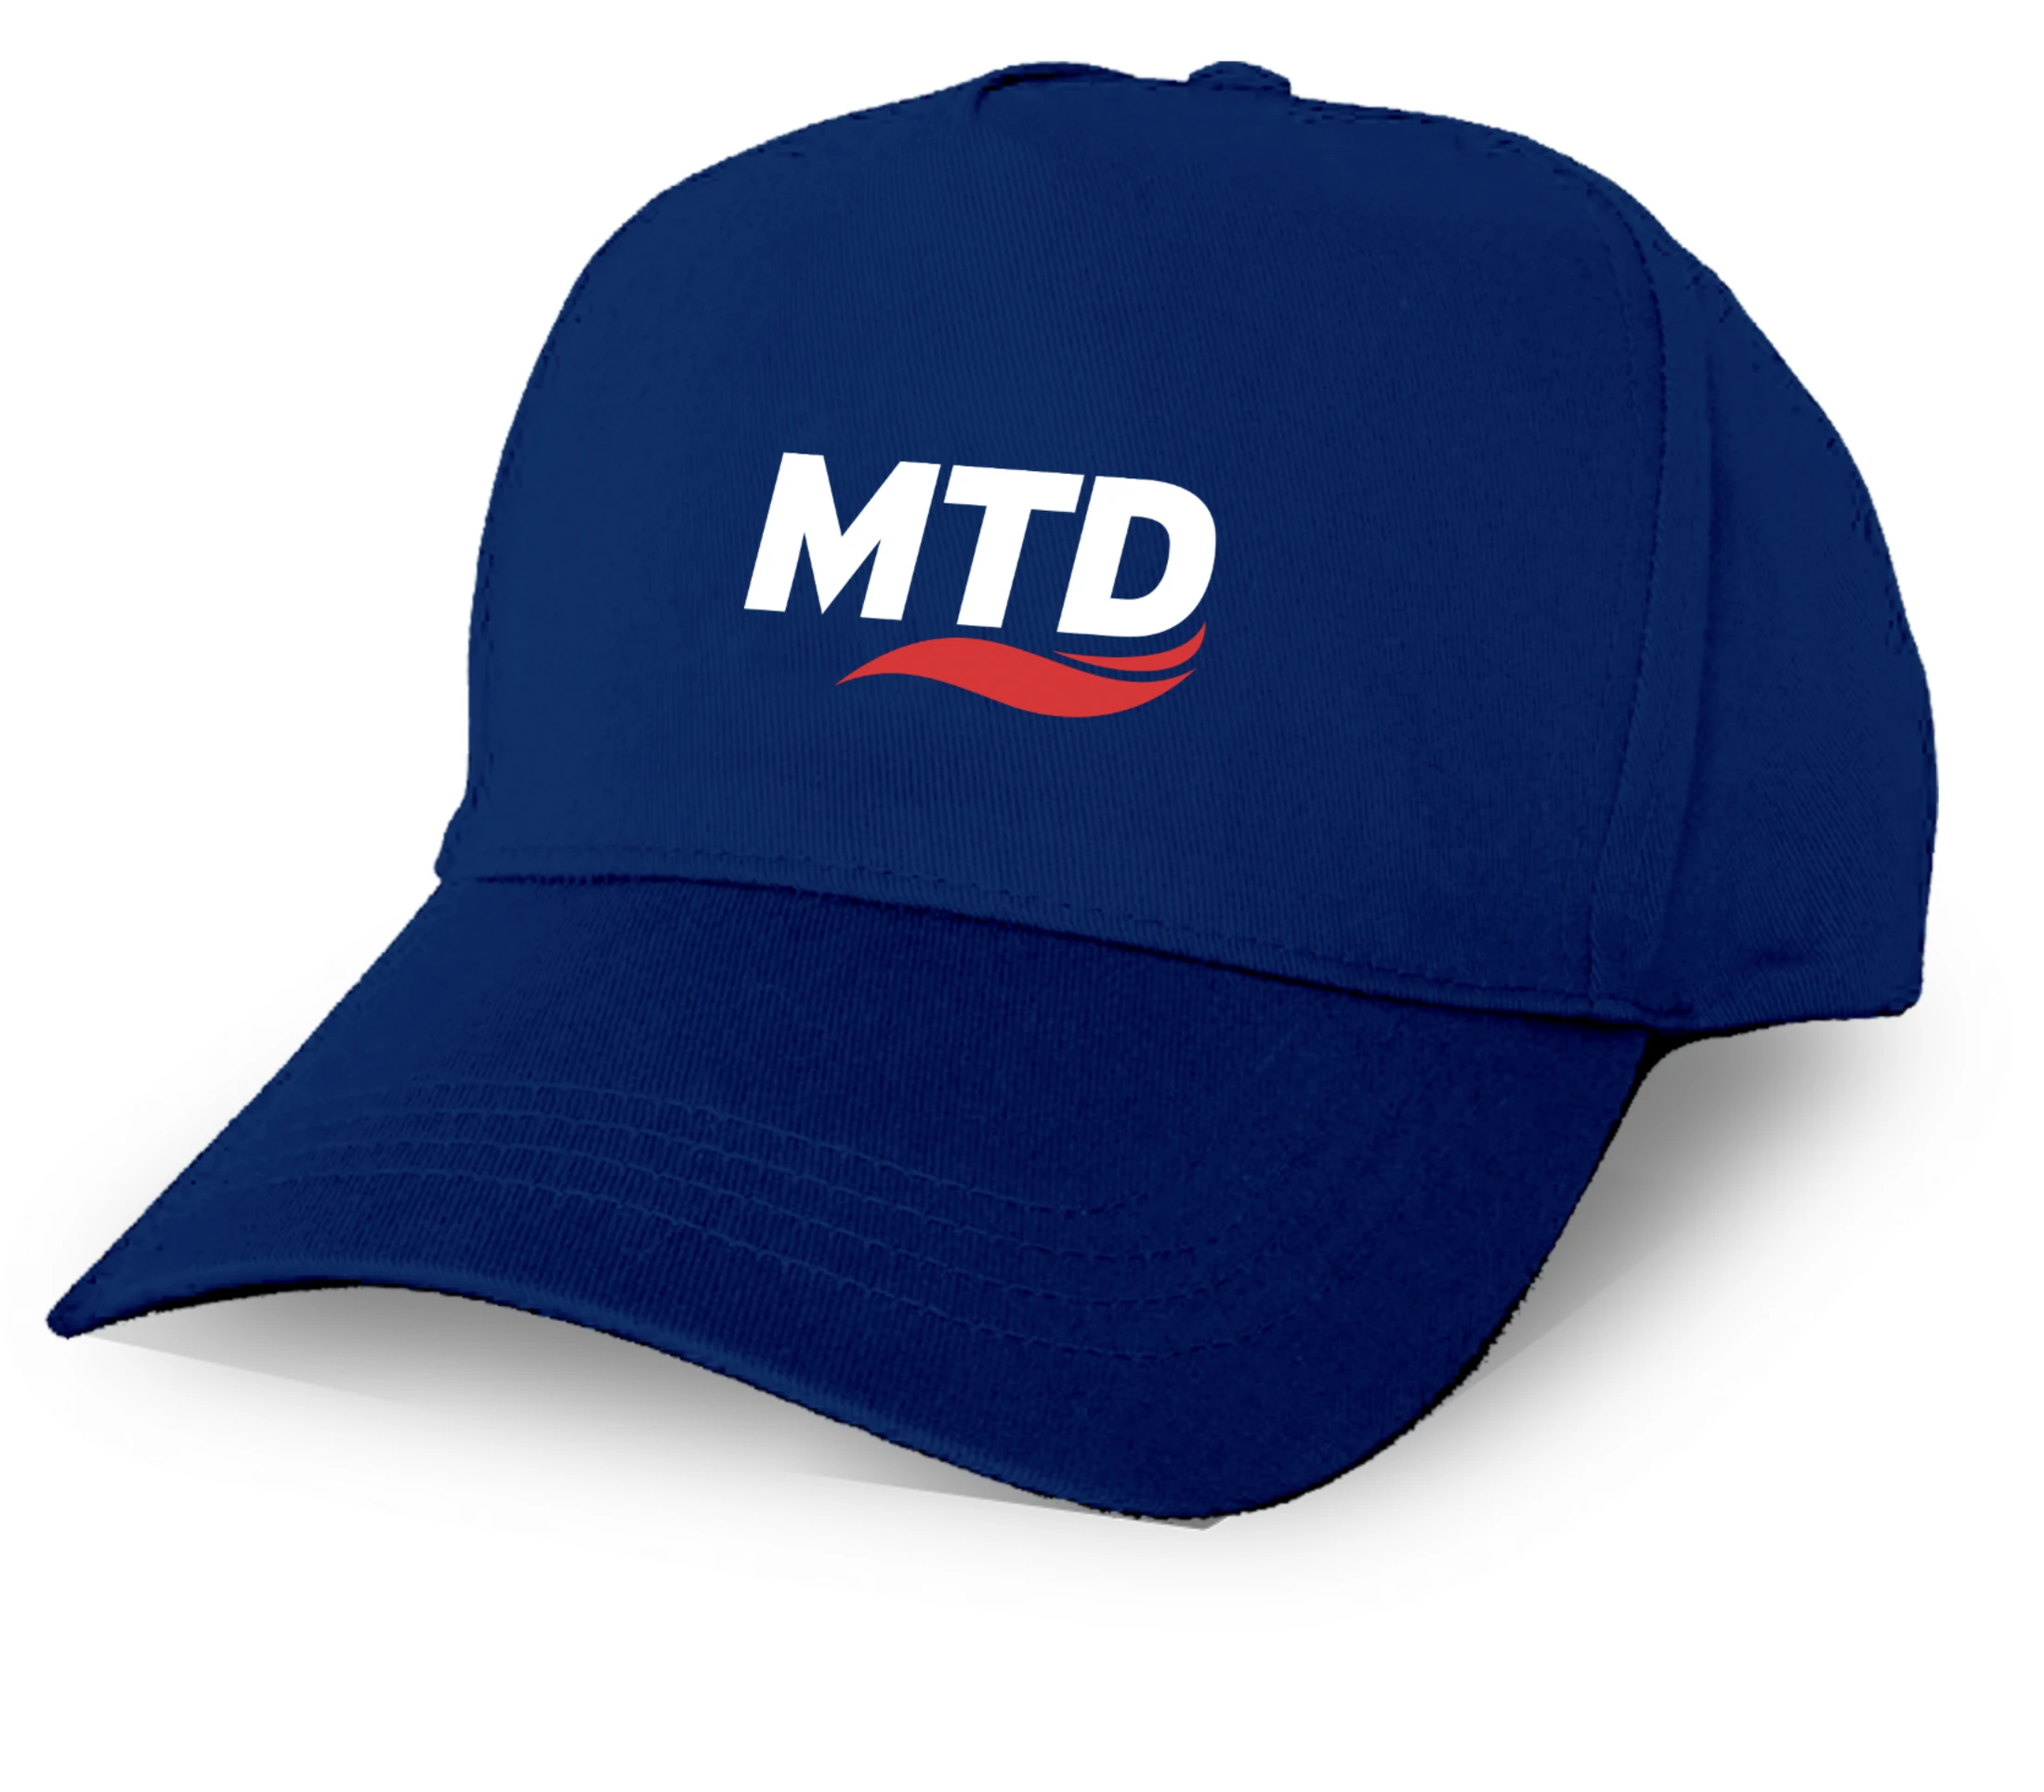 A blue hat with the word mtd on it.